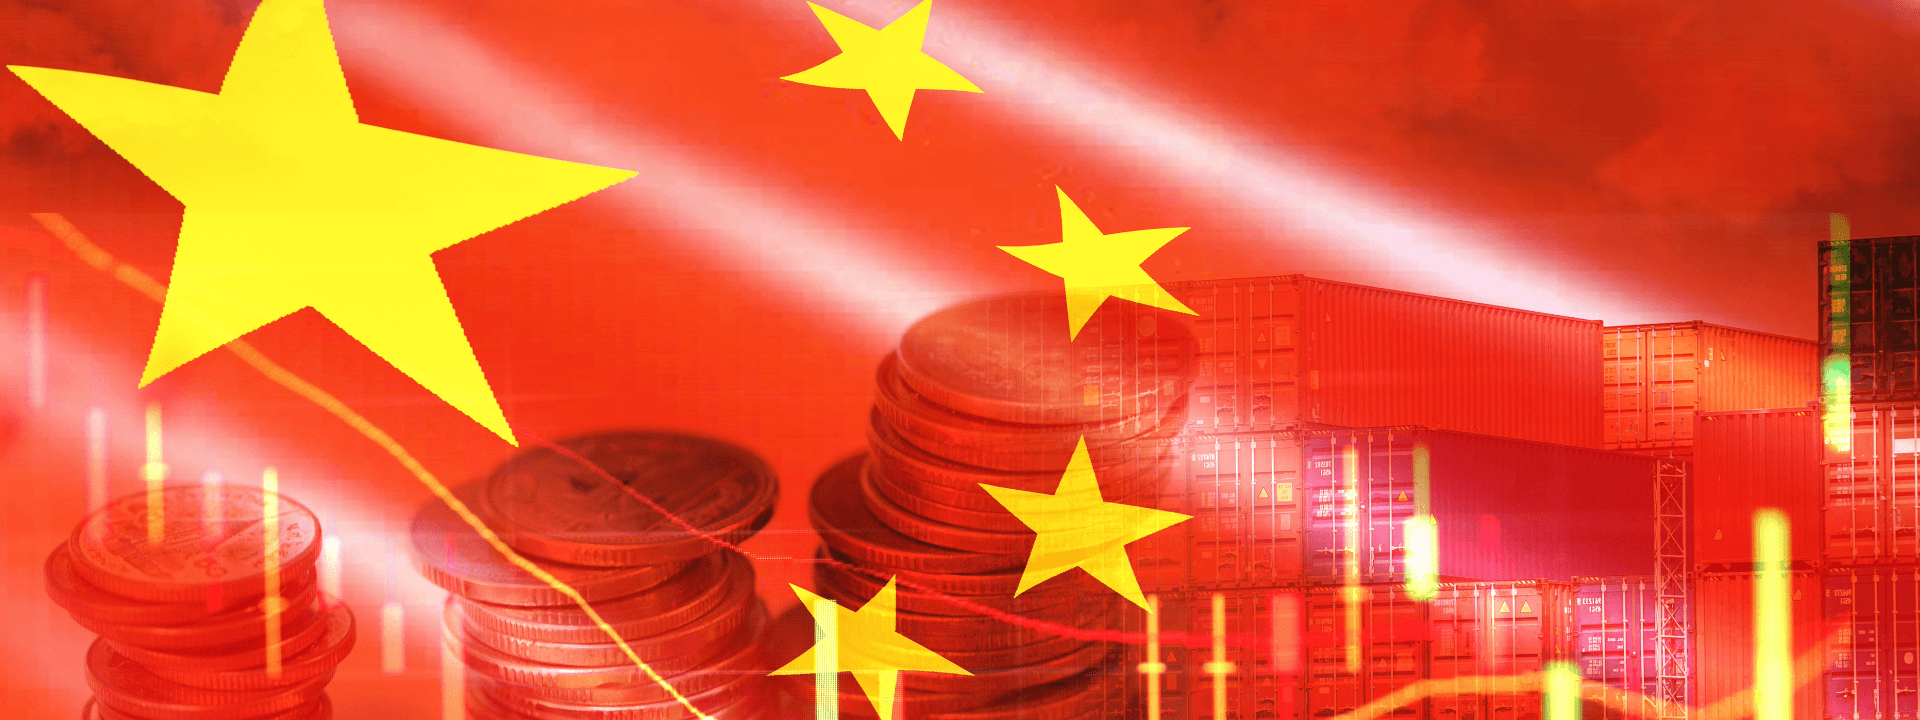 In Depth: China’s Ambition to Build a Financial Powerhouse